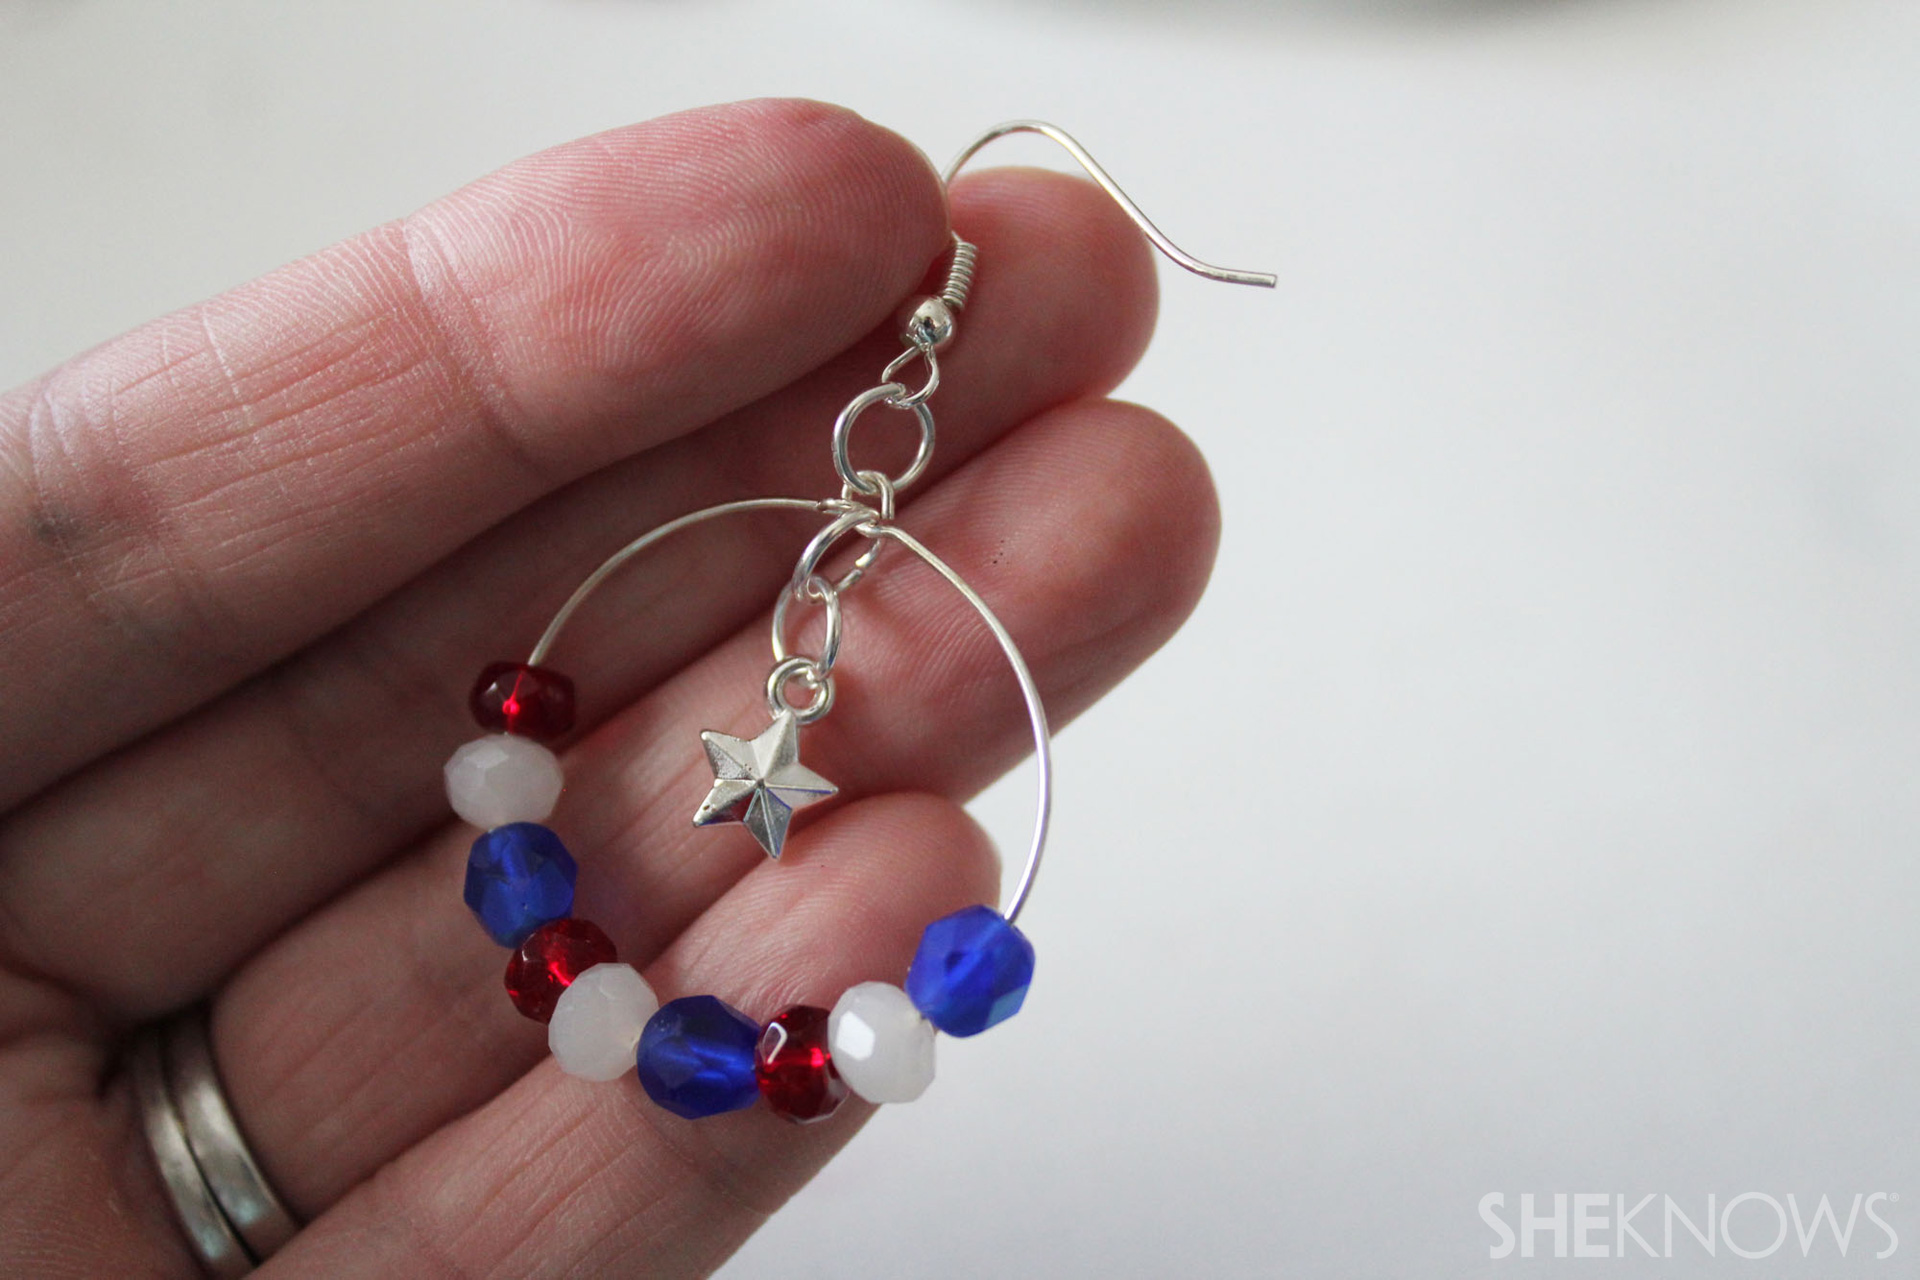  DIY jewelry: Patriotic earrings for July Fourth 